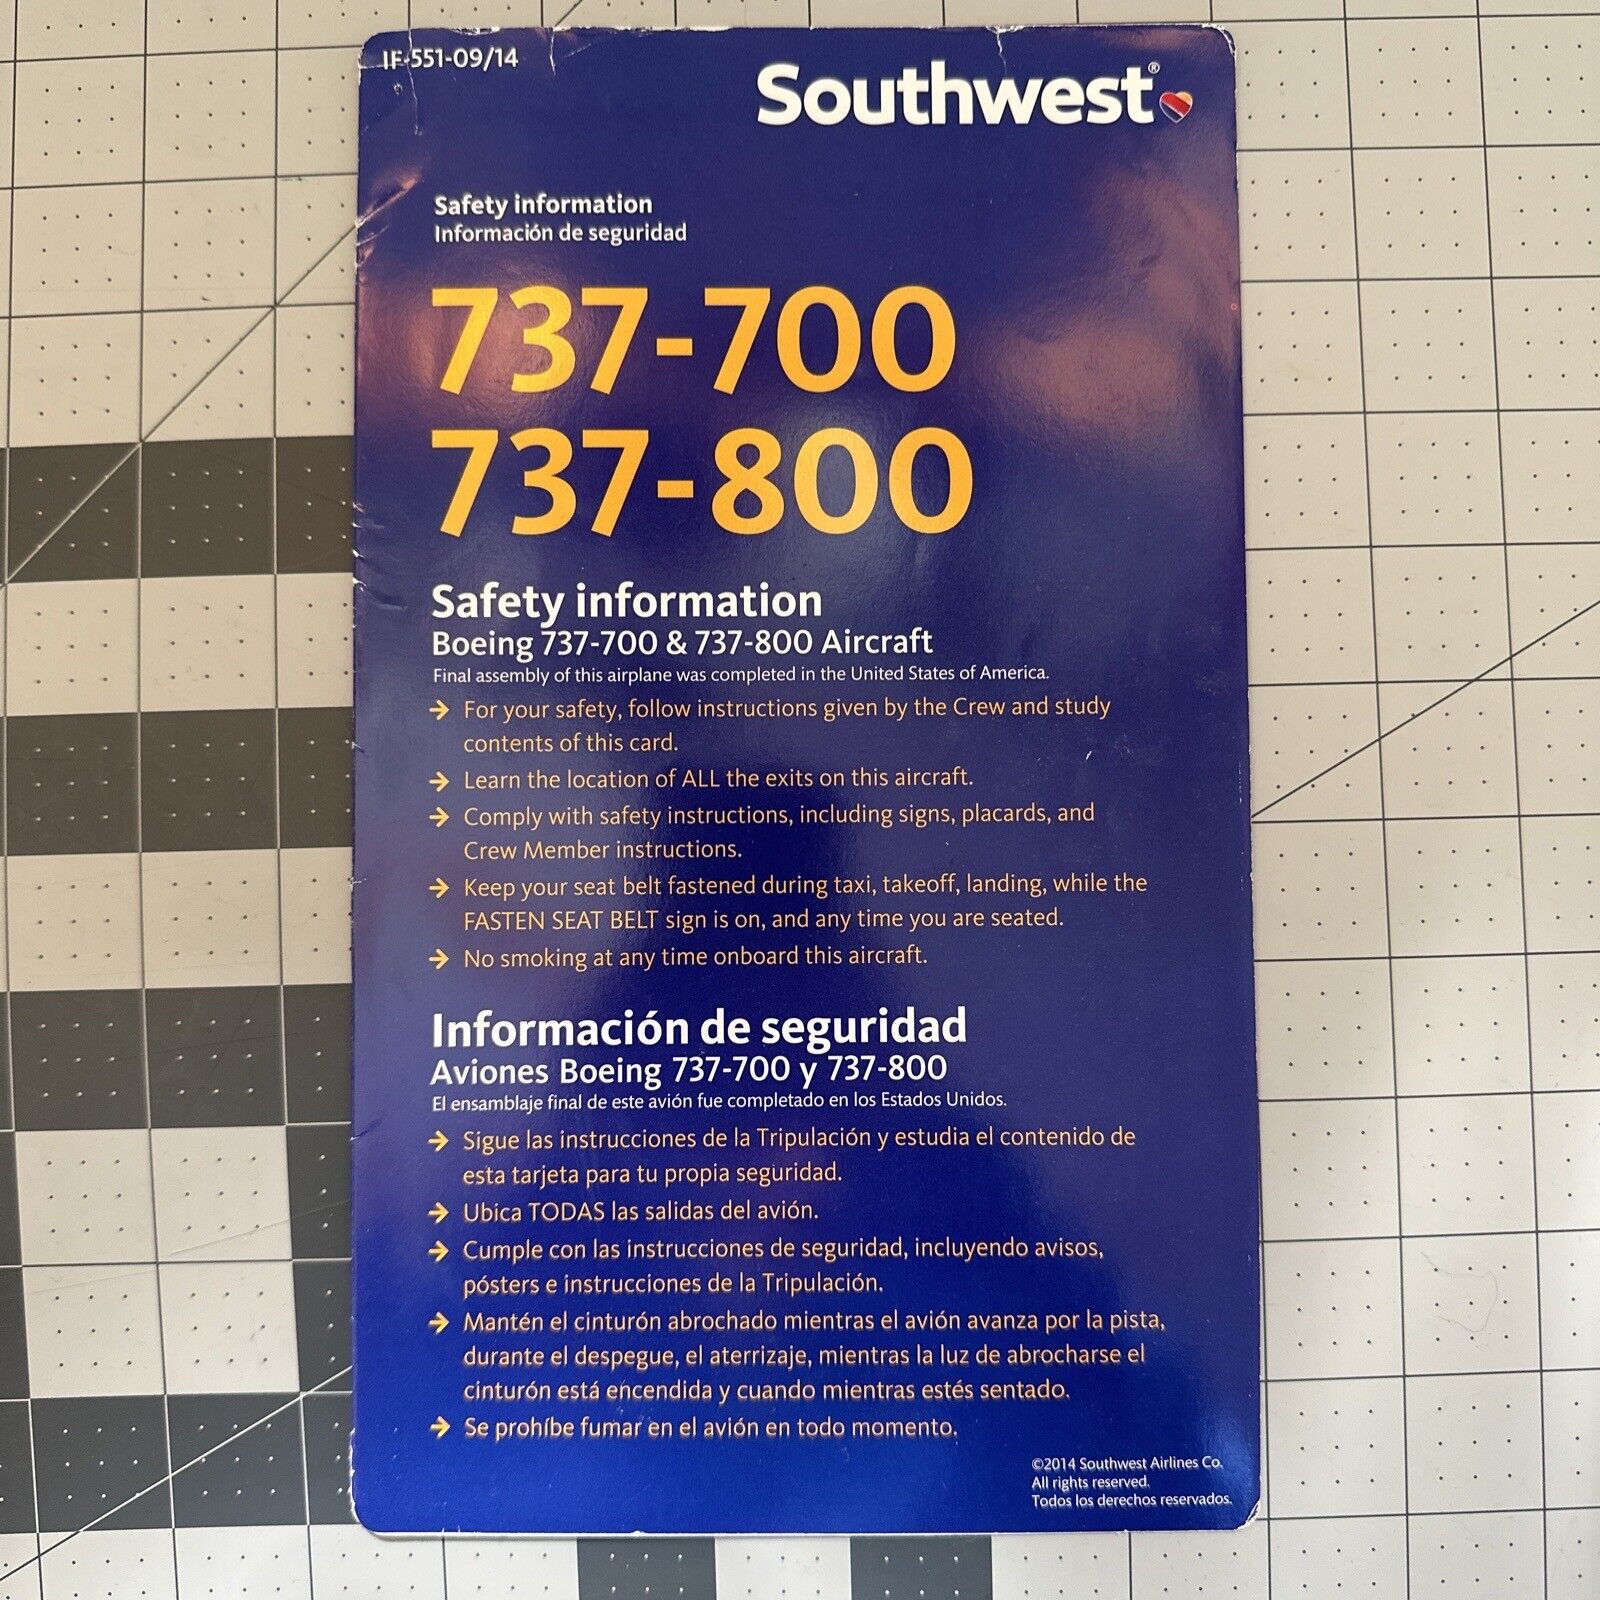 2014 SOUTHWEST AIRLINES SAFETY CARD--737-700/800